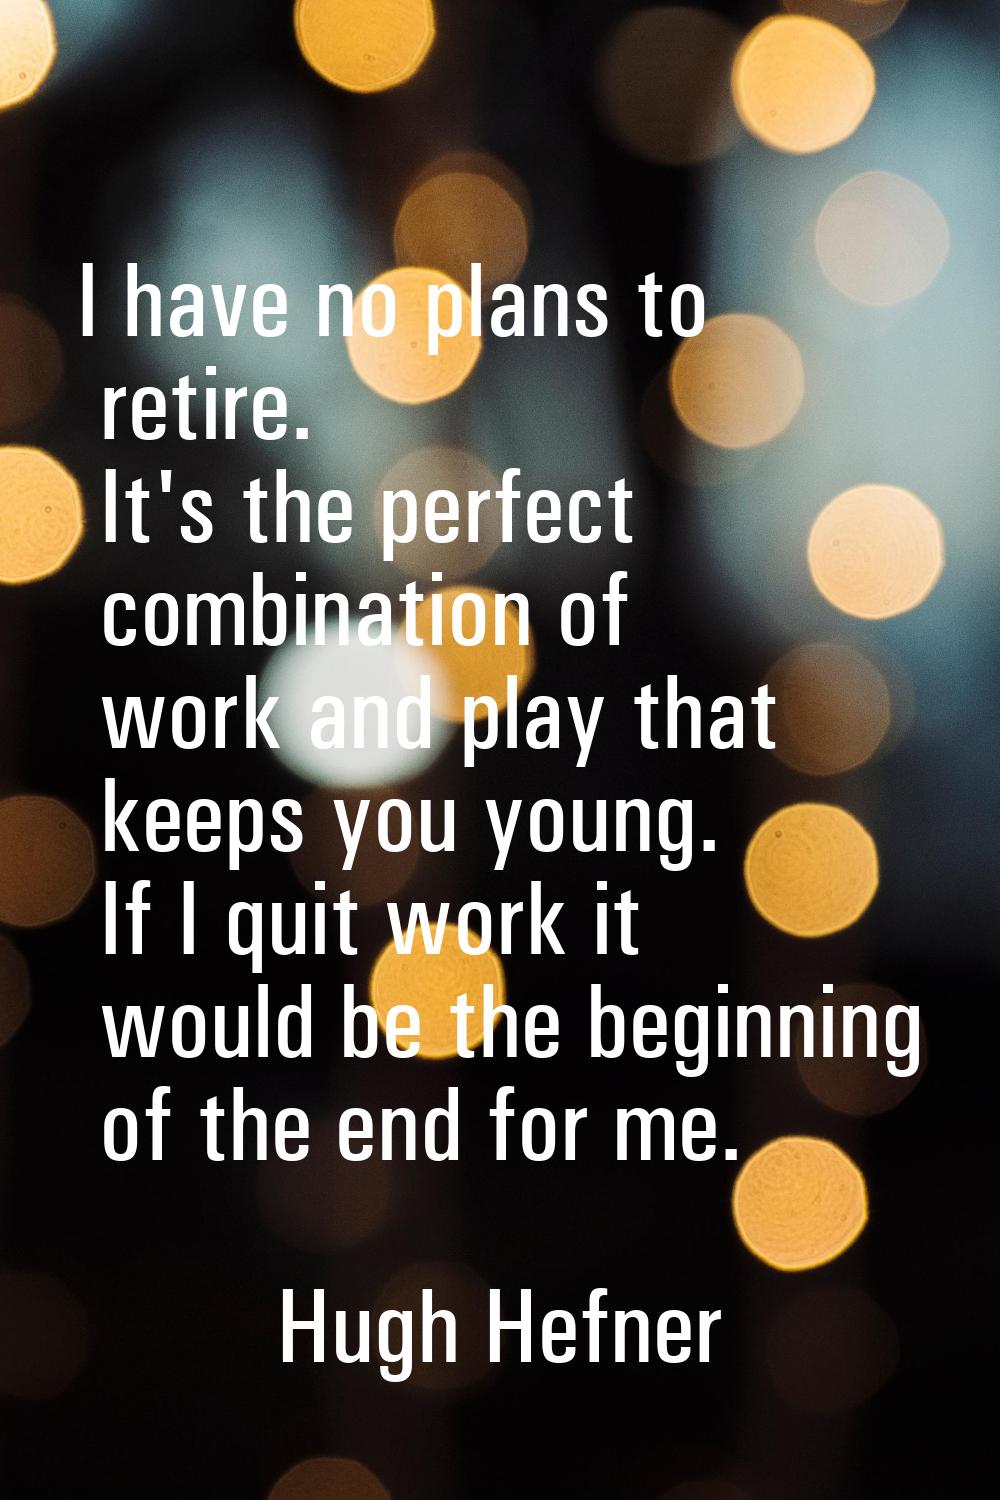 I have no plans to retire. It's the perfect combination of work and play that keeps you young. If I